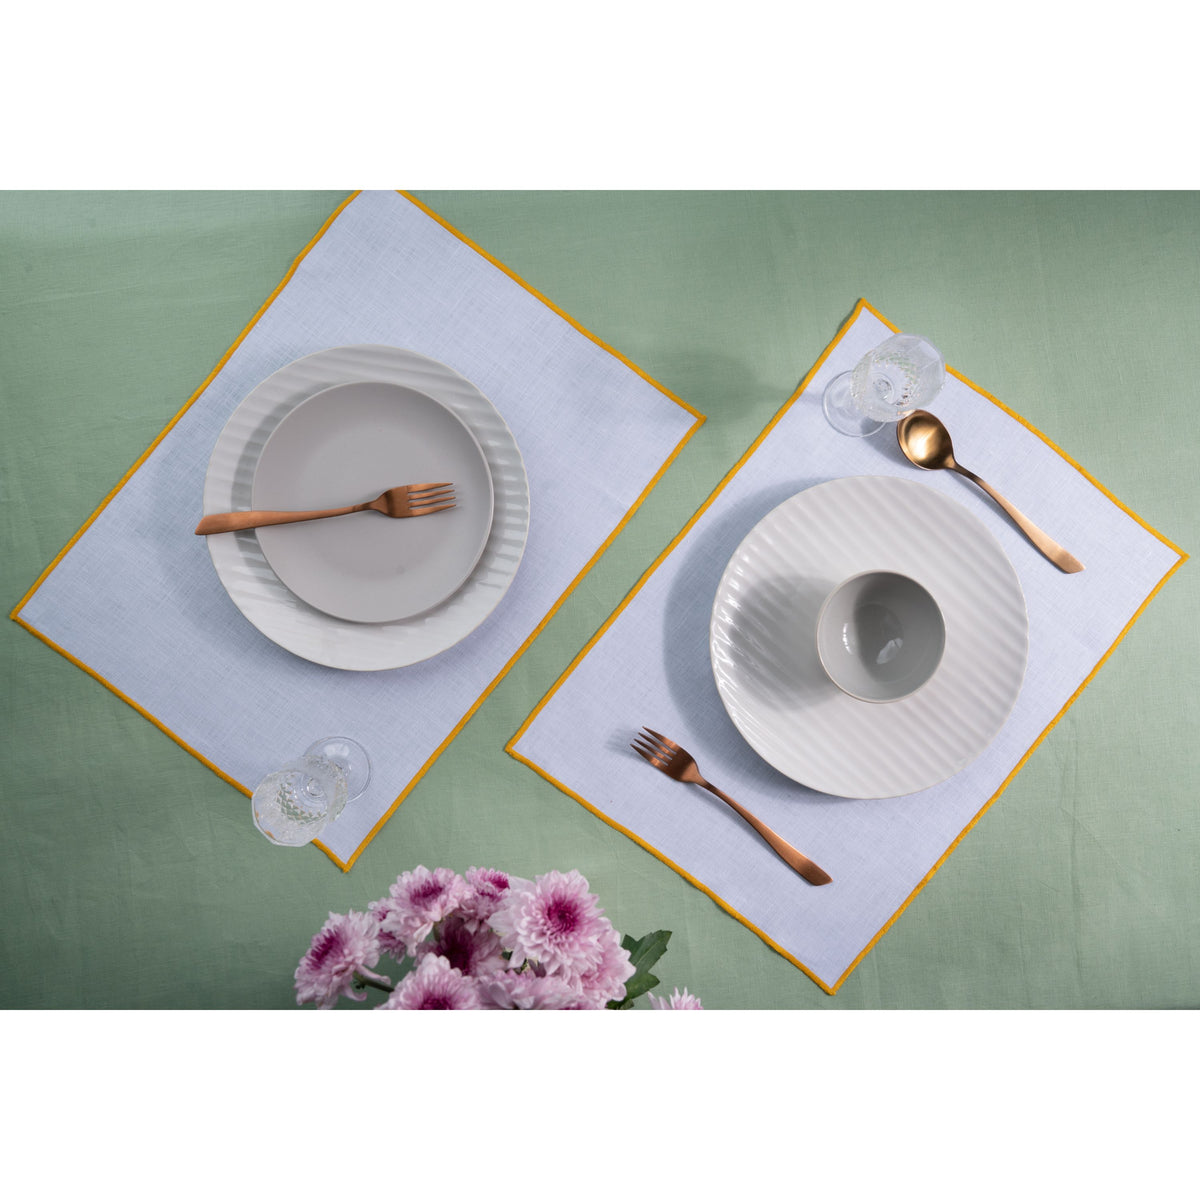 White & Yellow Linen Placemats 14 x 19 Inch Set of 4 - Marrow Edge